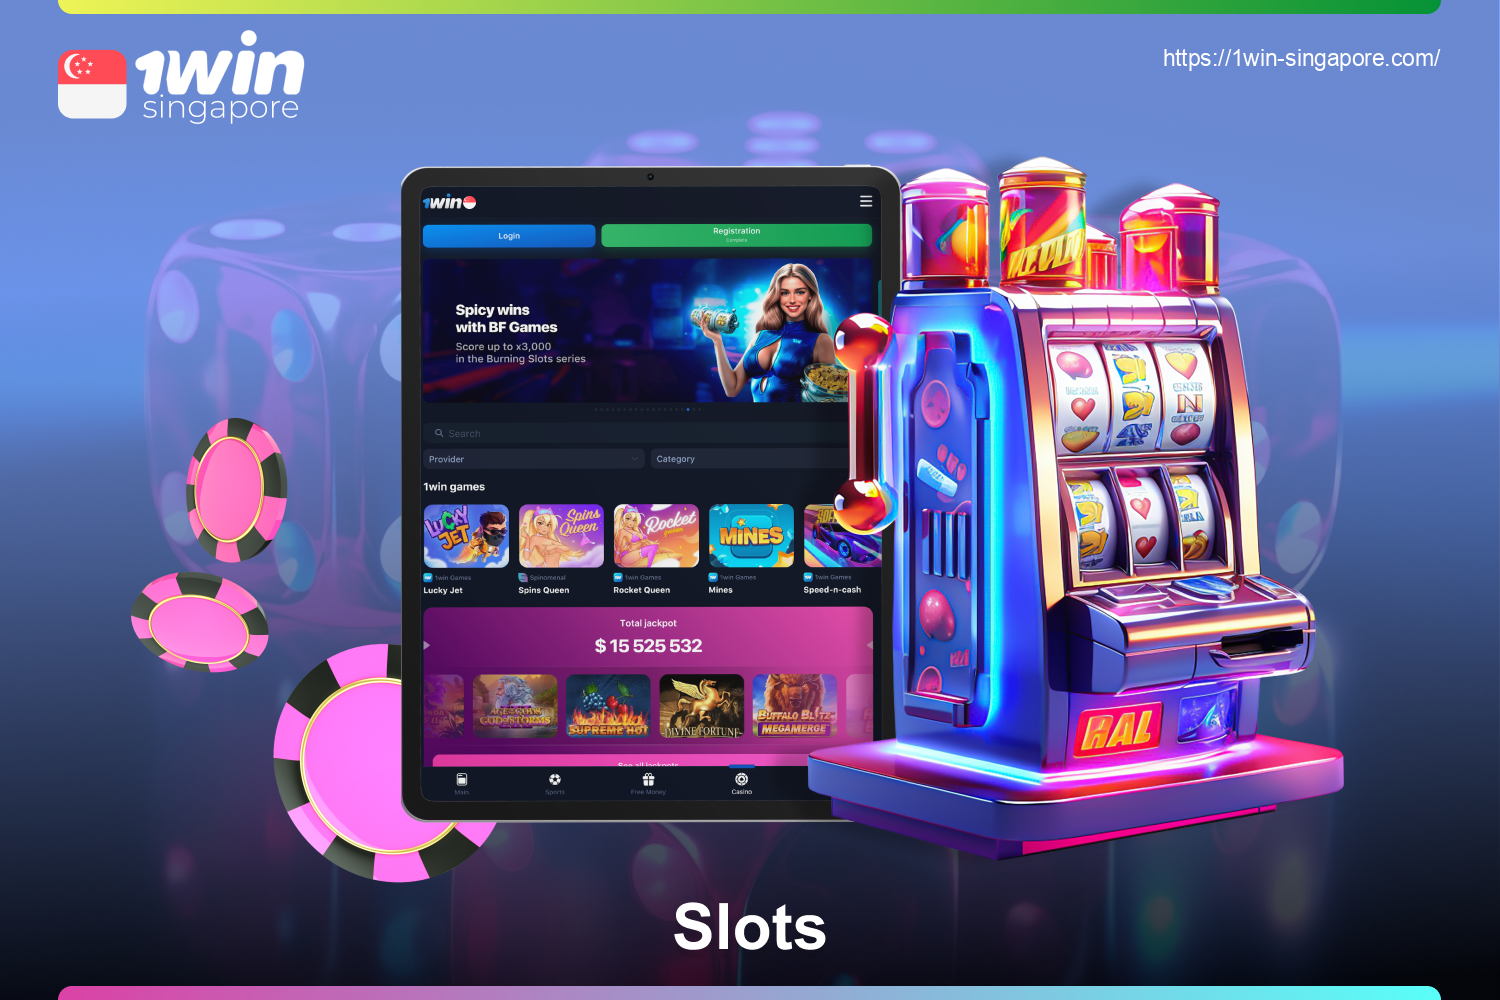 1win Singapore offers a large selection of slots in different genres: slots, video, 3D, Megaways, Tumbling, Cascade, "Book" and others